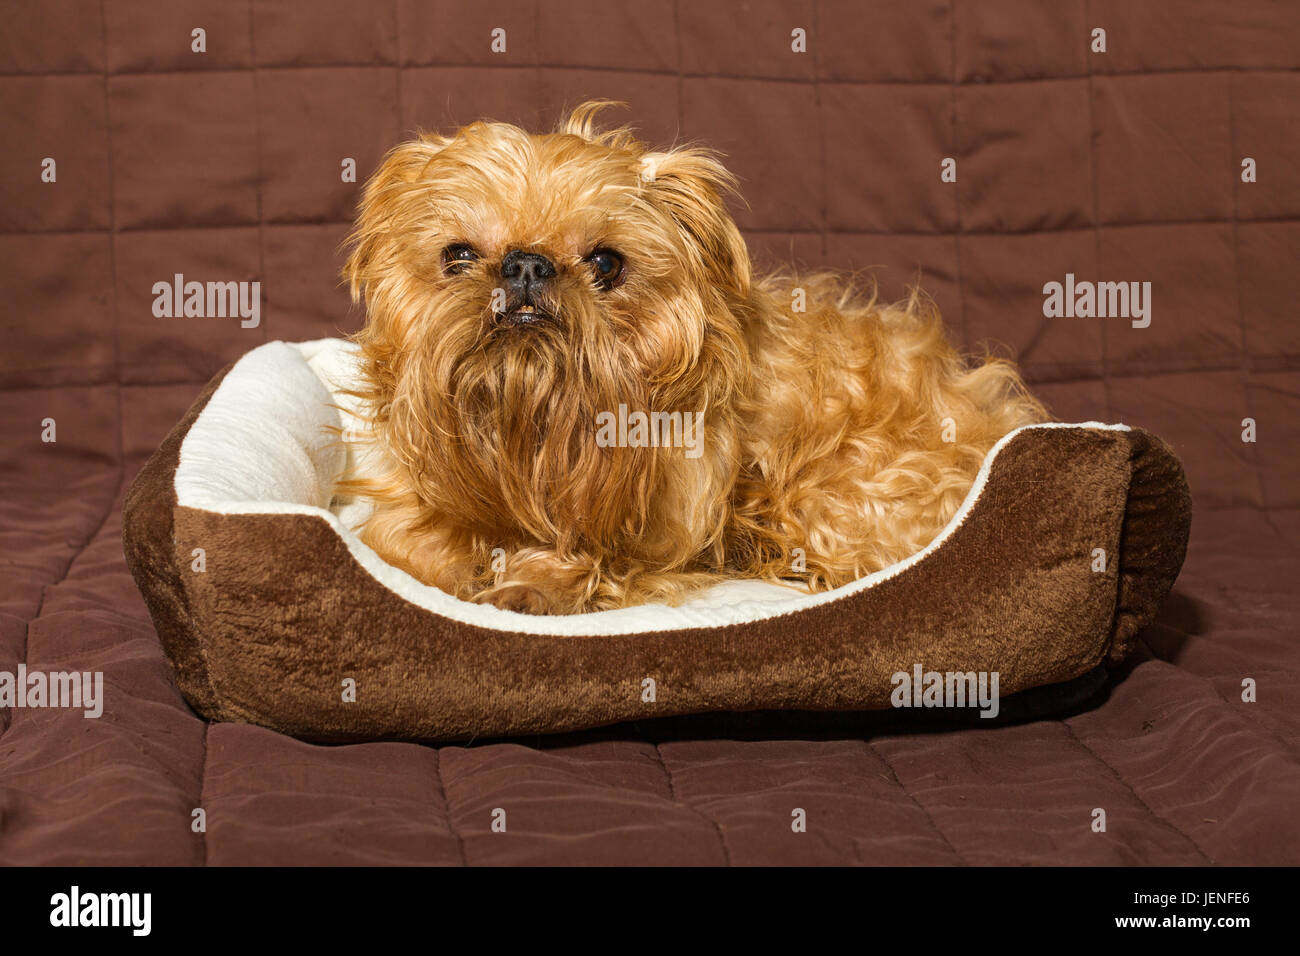 Dog breed Brussels Griffon is in bed Stock Photo - Alamy